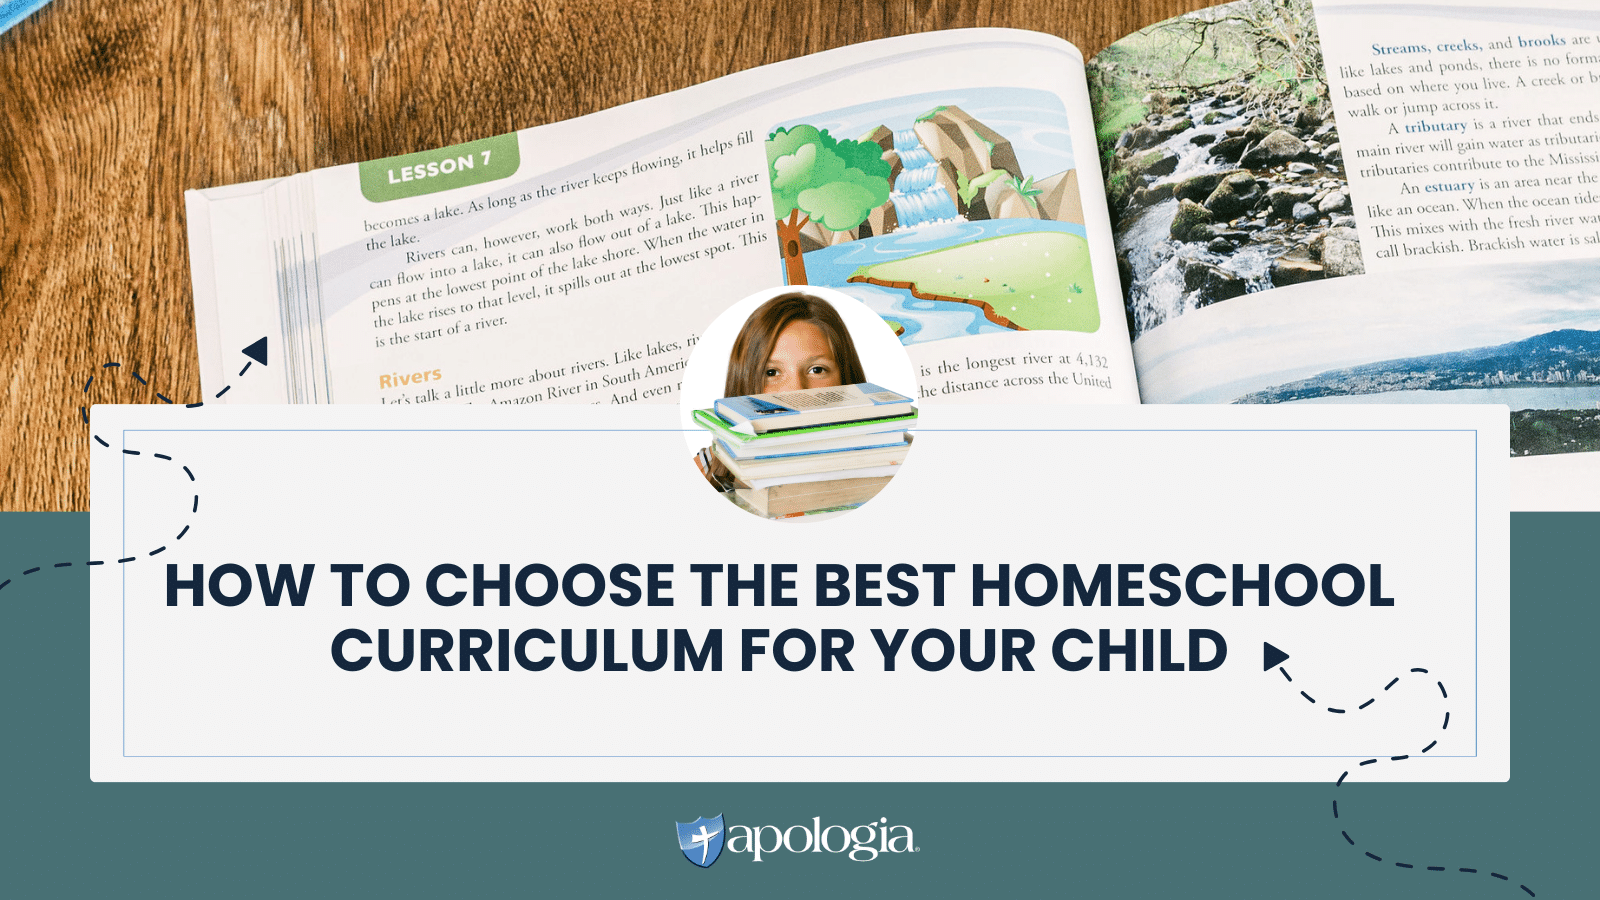 Choosing a Homeschool Curriculum for Your Child